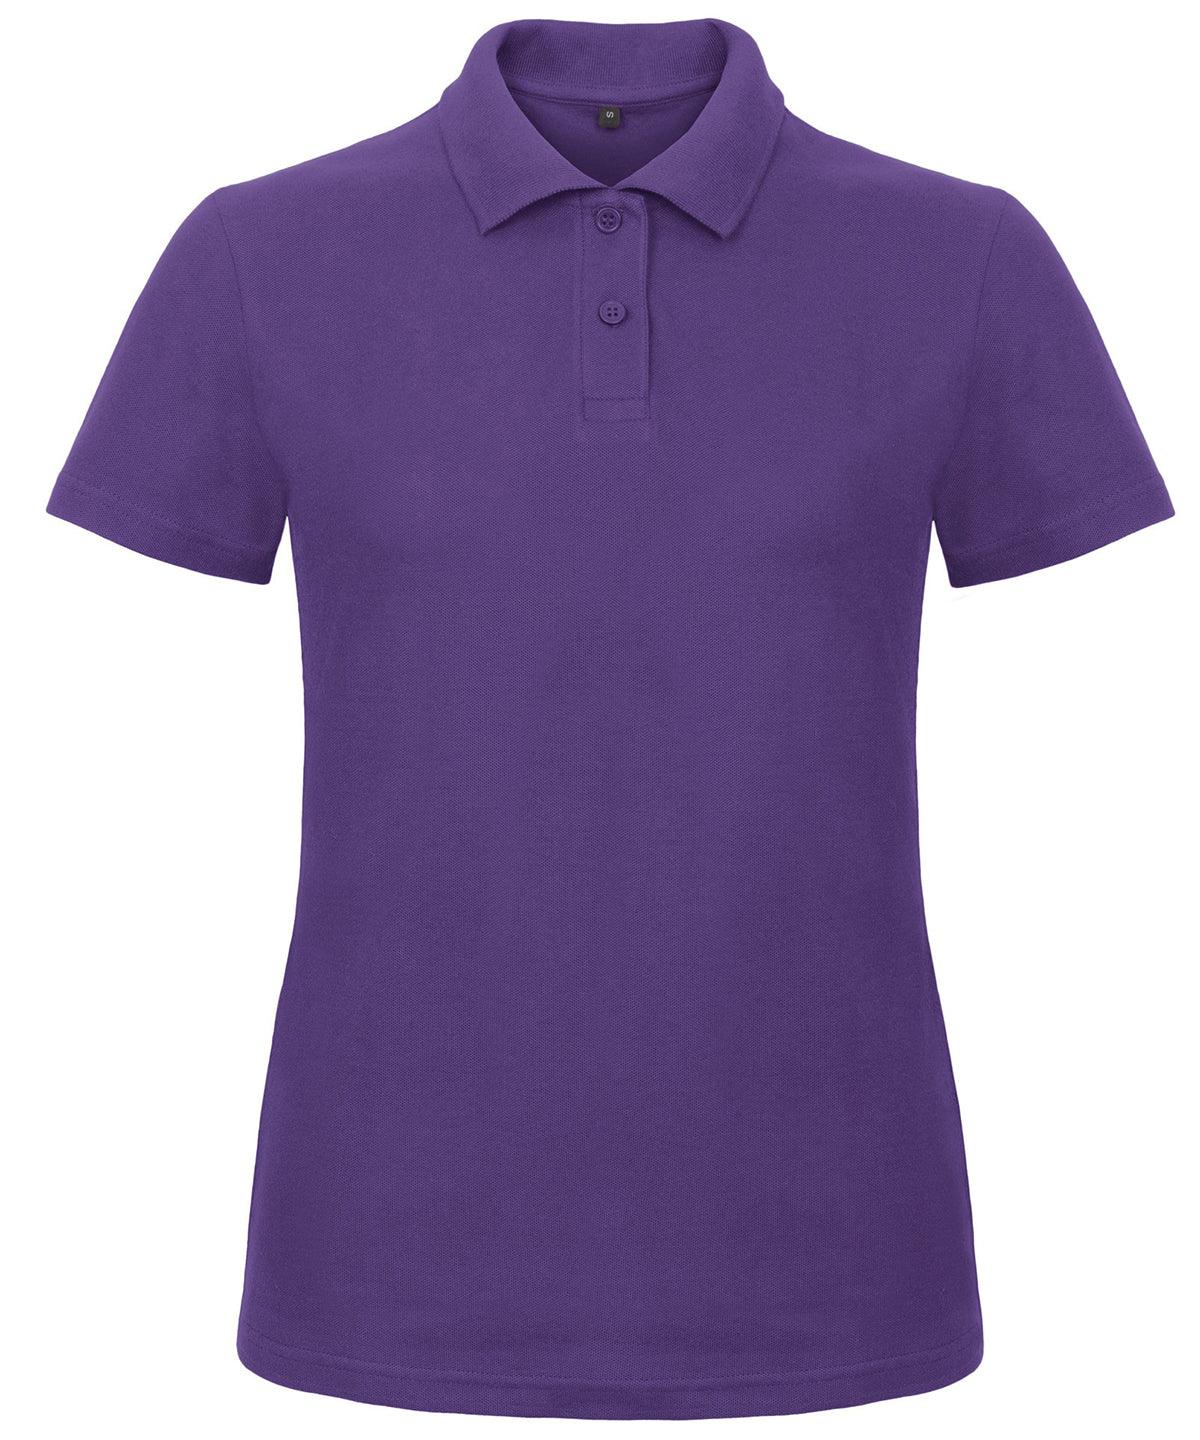 Purple - B&C ID.001 polo /women Polos B&C Collection Must Haves, Plus Sizes, Polos & Casual, Women's Fashion Schoolwear Centres